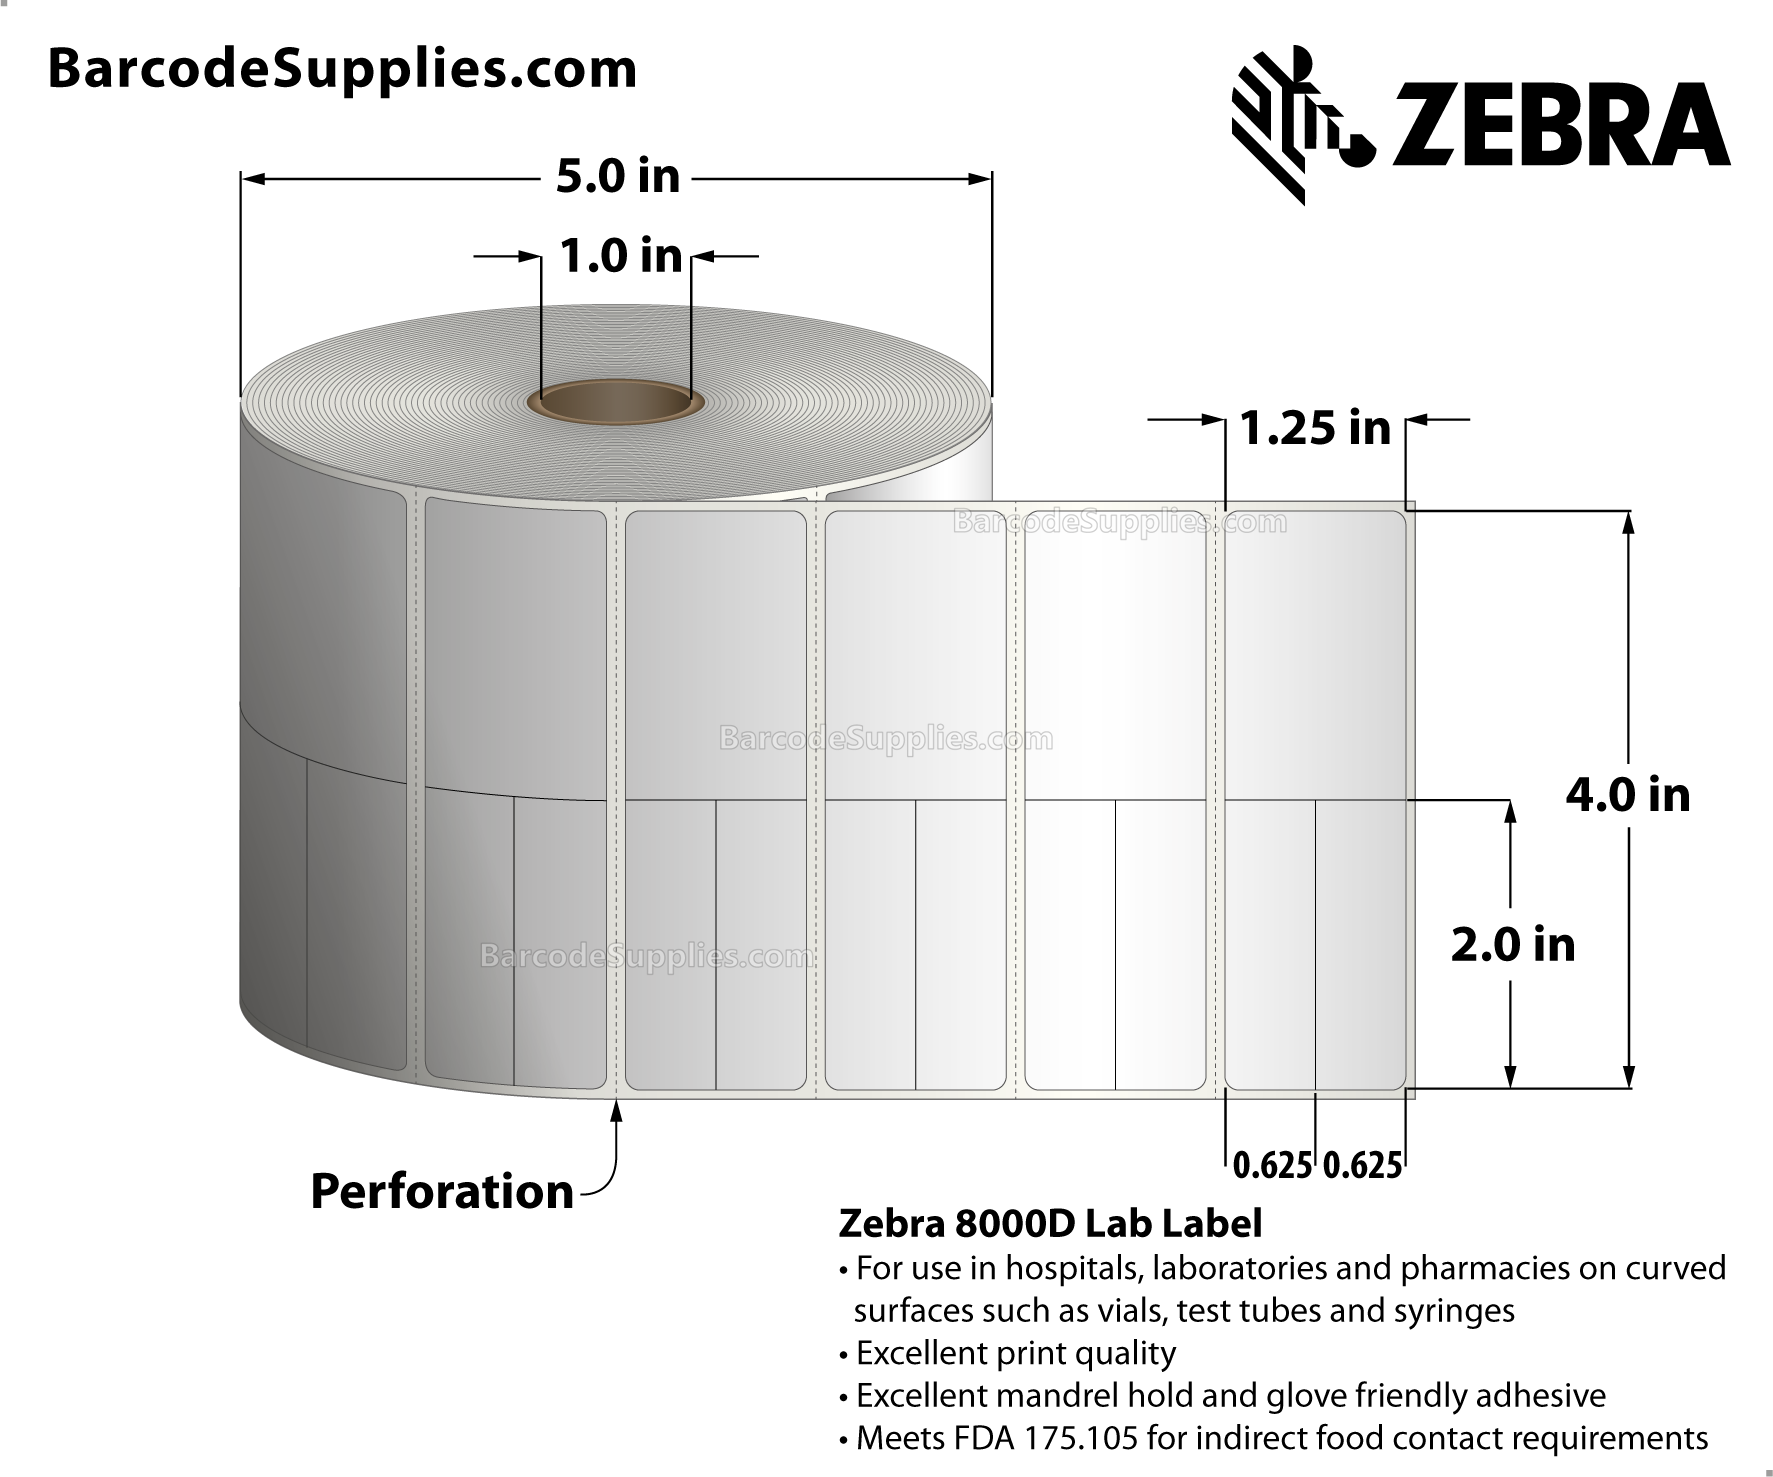 4 x 1.25 Direct Thermal White 8000D Lab Labels With Permanent Adhesive - Perforated - 1911 Labels Per Roll - Carton Of 6 Rolls - 11466 Labels Total - MPN: 10018357